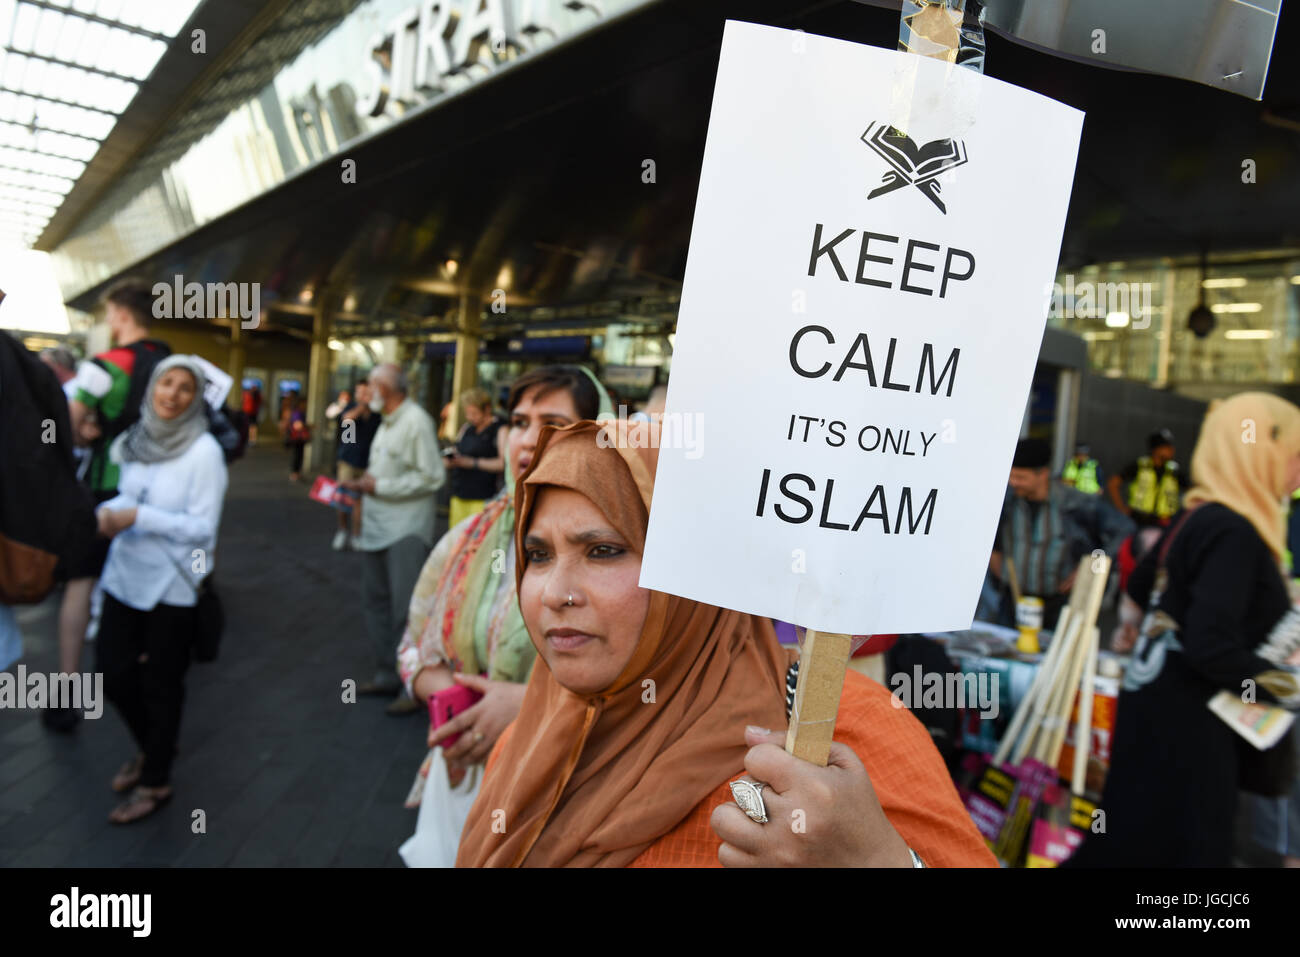 London, UK. 05th JUL 2017. 'STOP ACID ATTACKS' emergency protest outside the Stratford station in East London. Protesters gathered to protest against the recent acid attacks and increasing Islamophobia. A Muslim woman is holding a placard reading: 'Keep Calm It's Only Islam'. Credit: ZEN - Zaneta Razaite/Alamy Live News Stock Photo